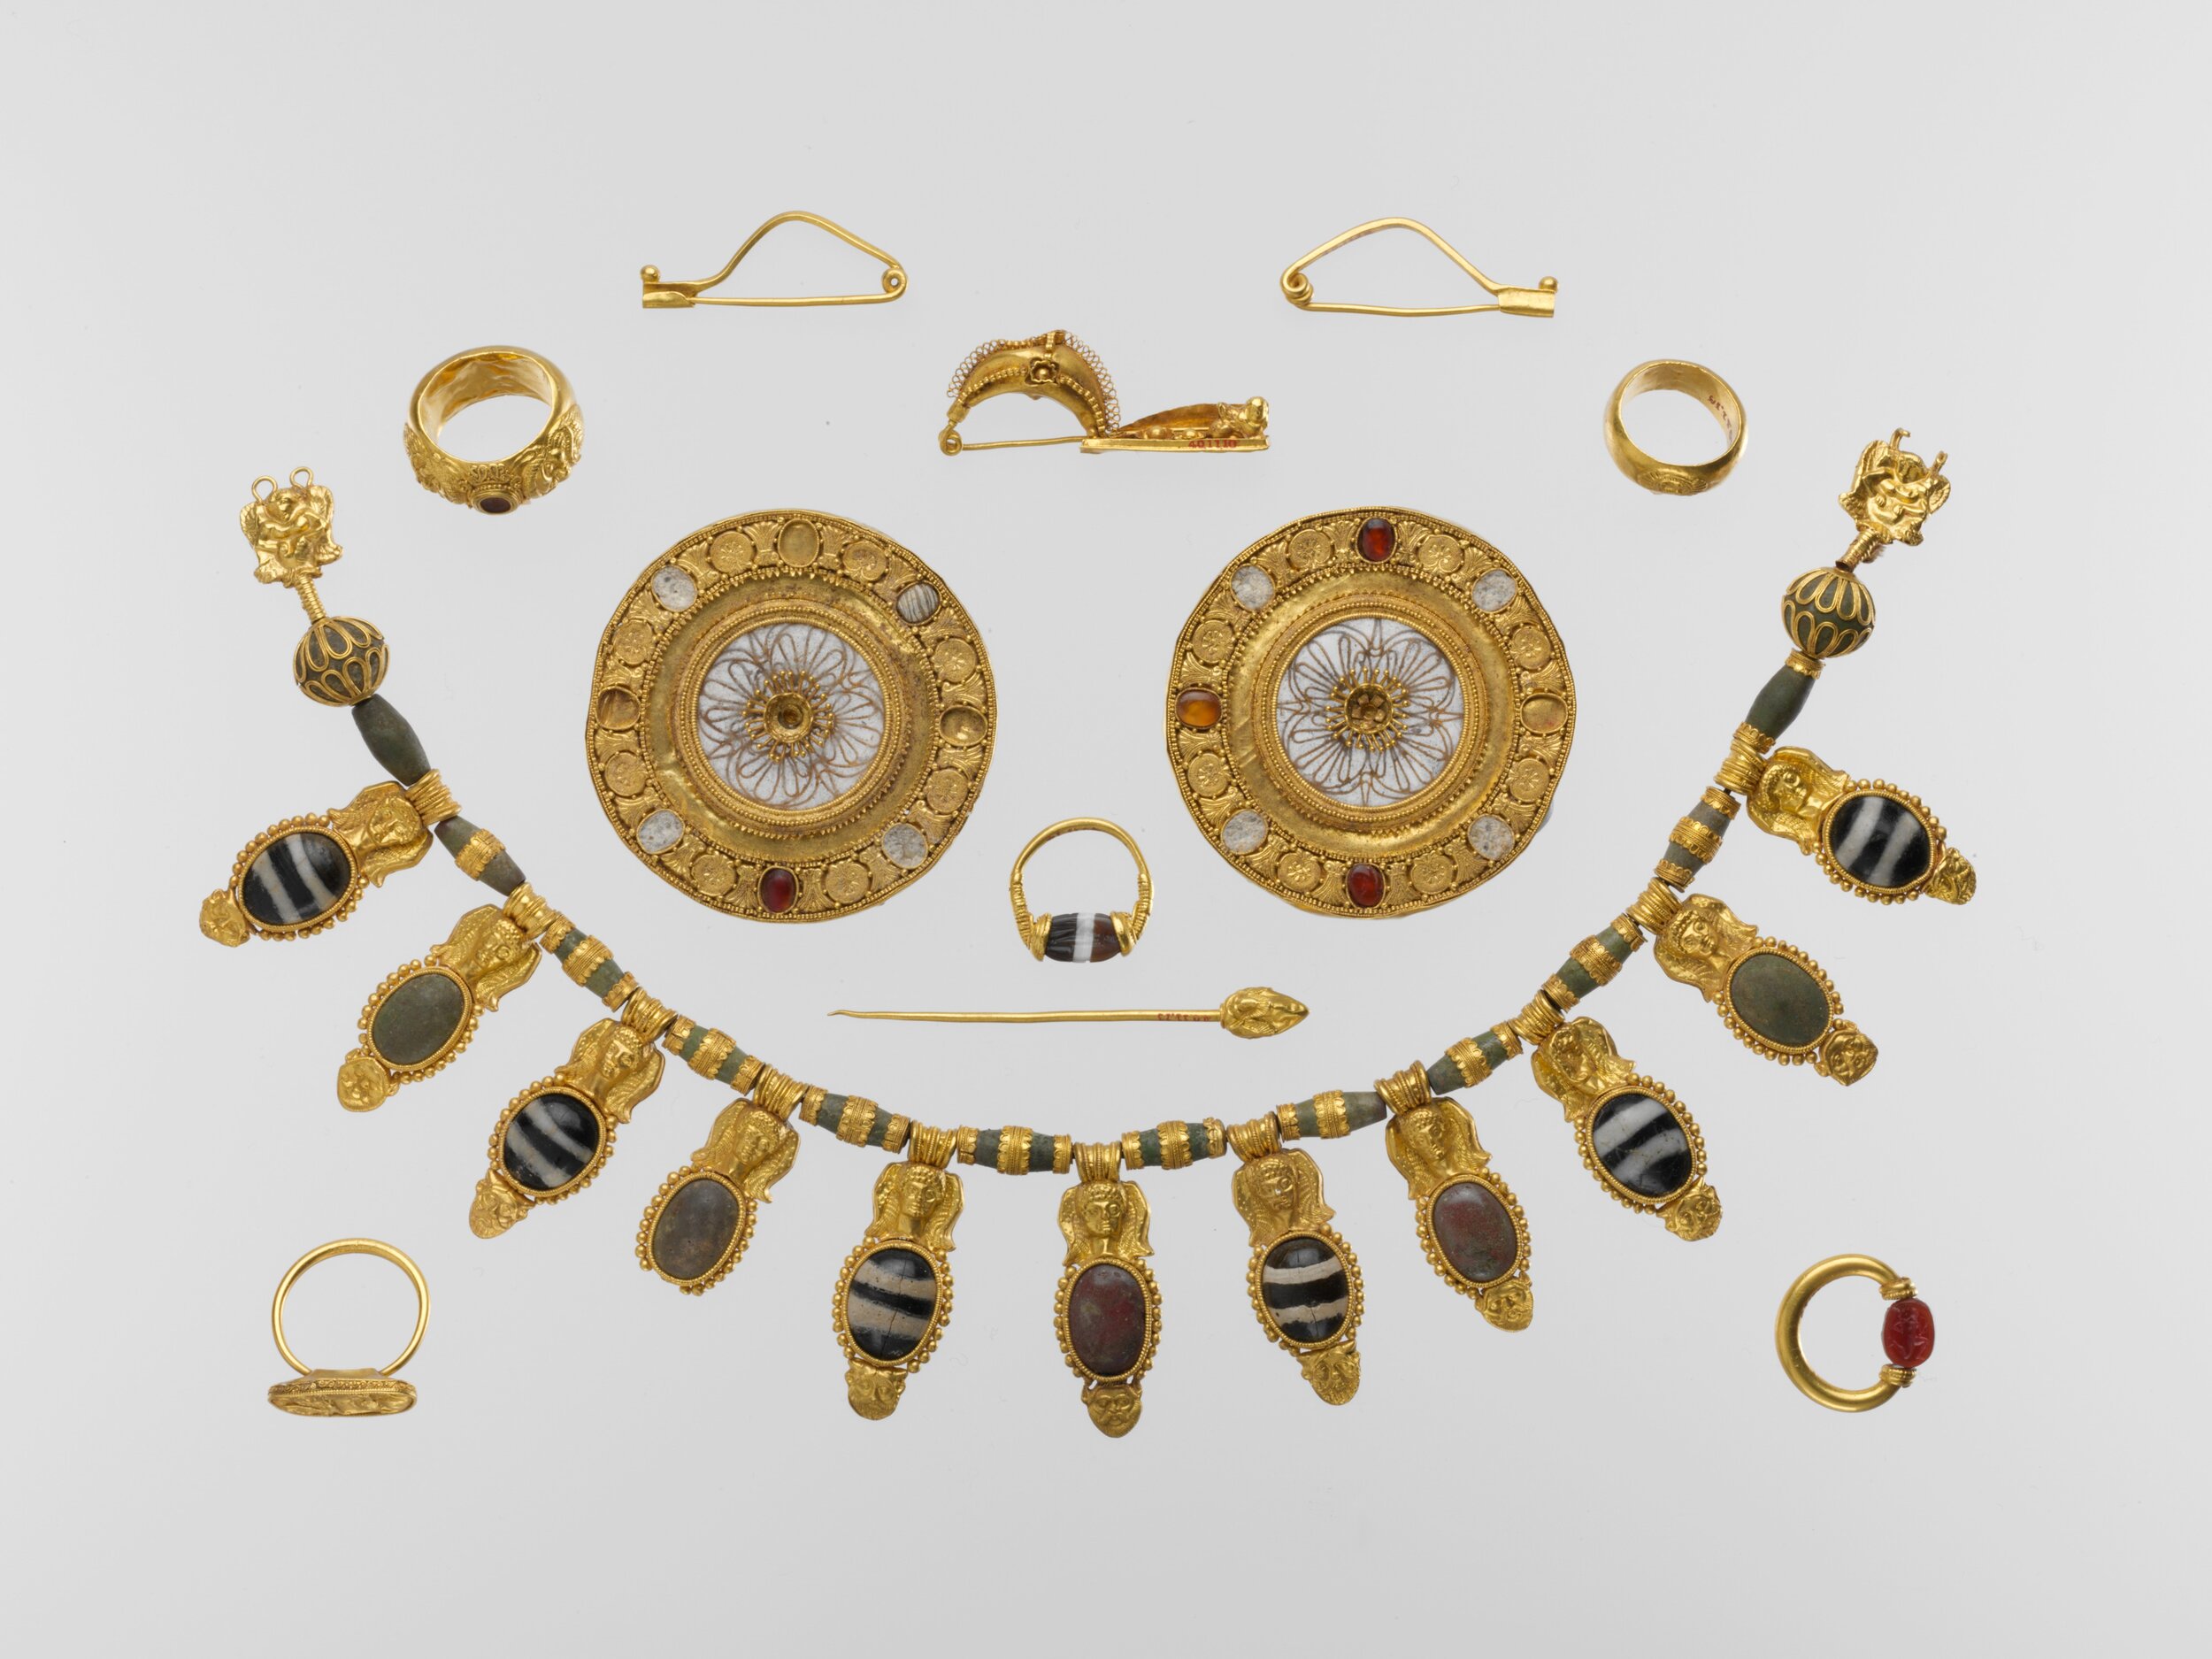 I'll take it! 5th-century Roman/Etruscan jewelry set, courtesy of the MET